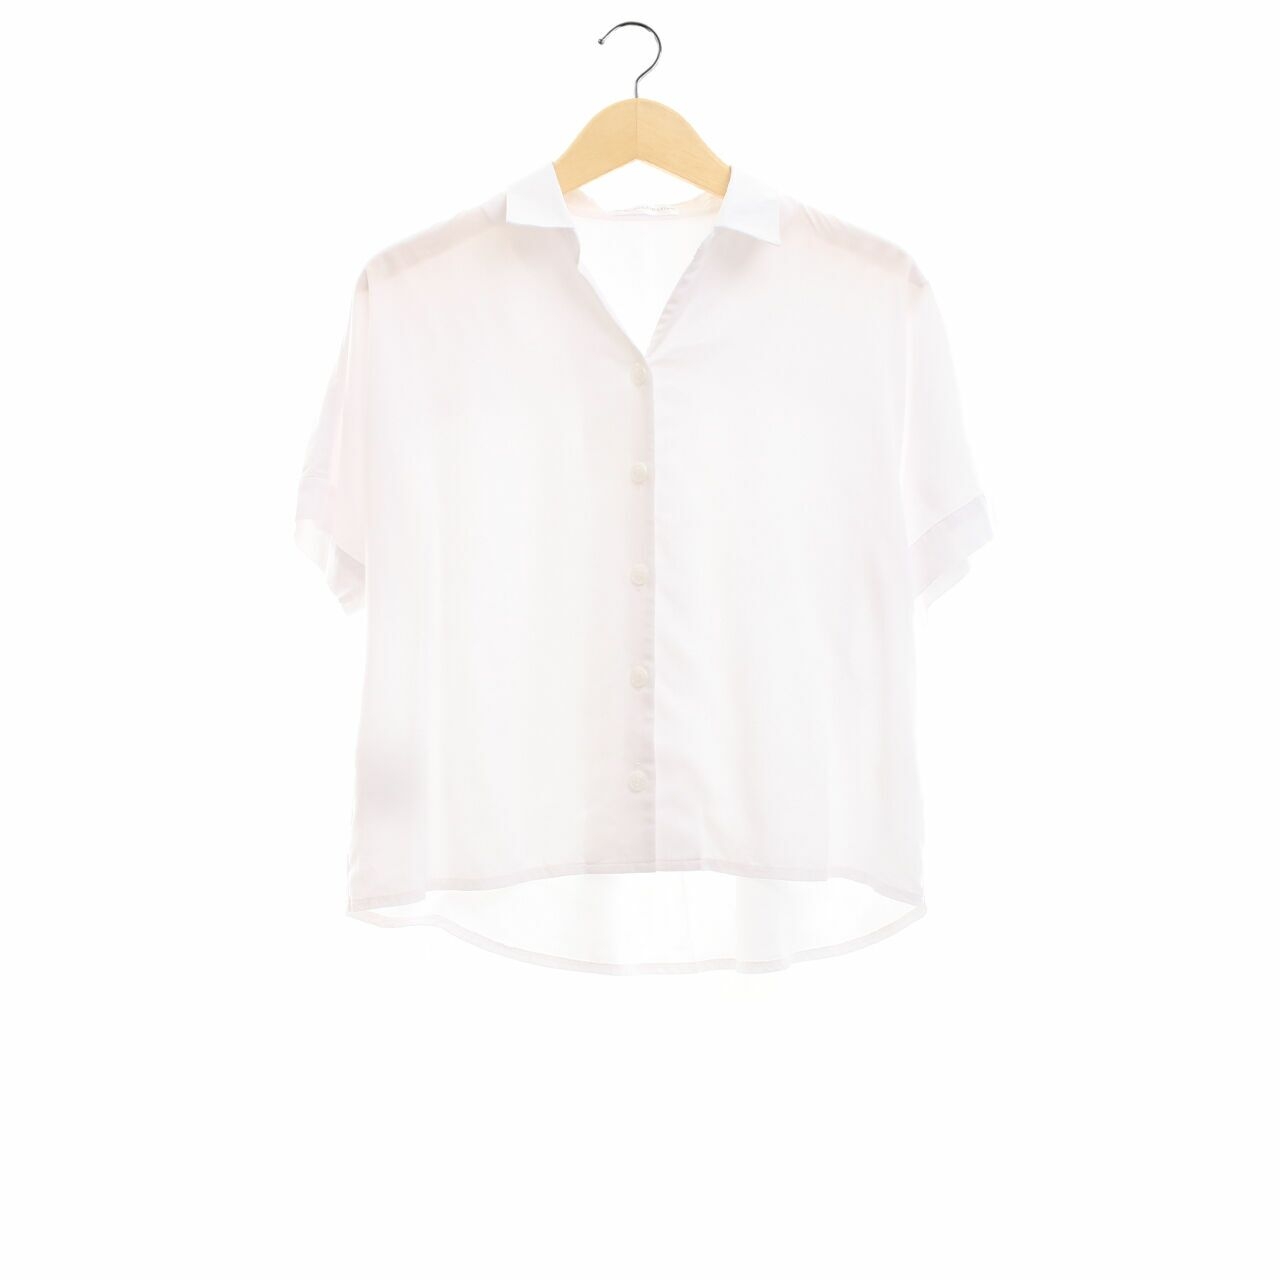 Krom Collective White Shirt